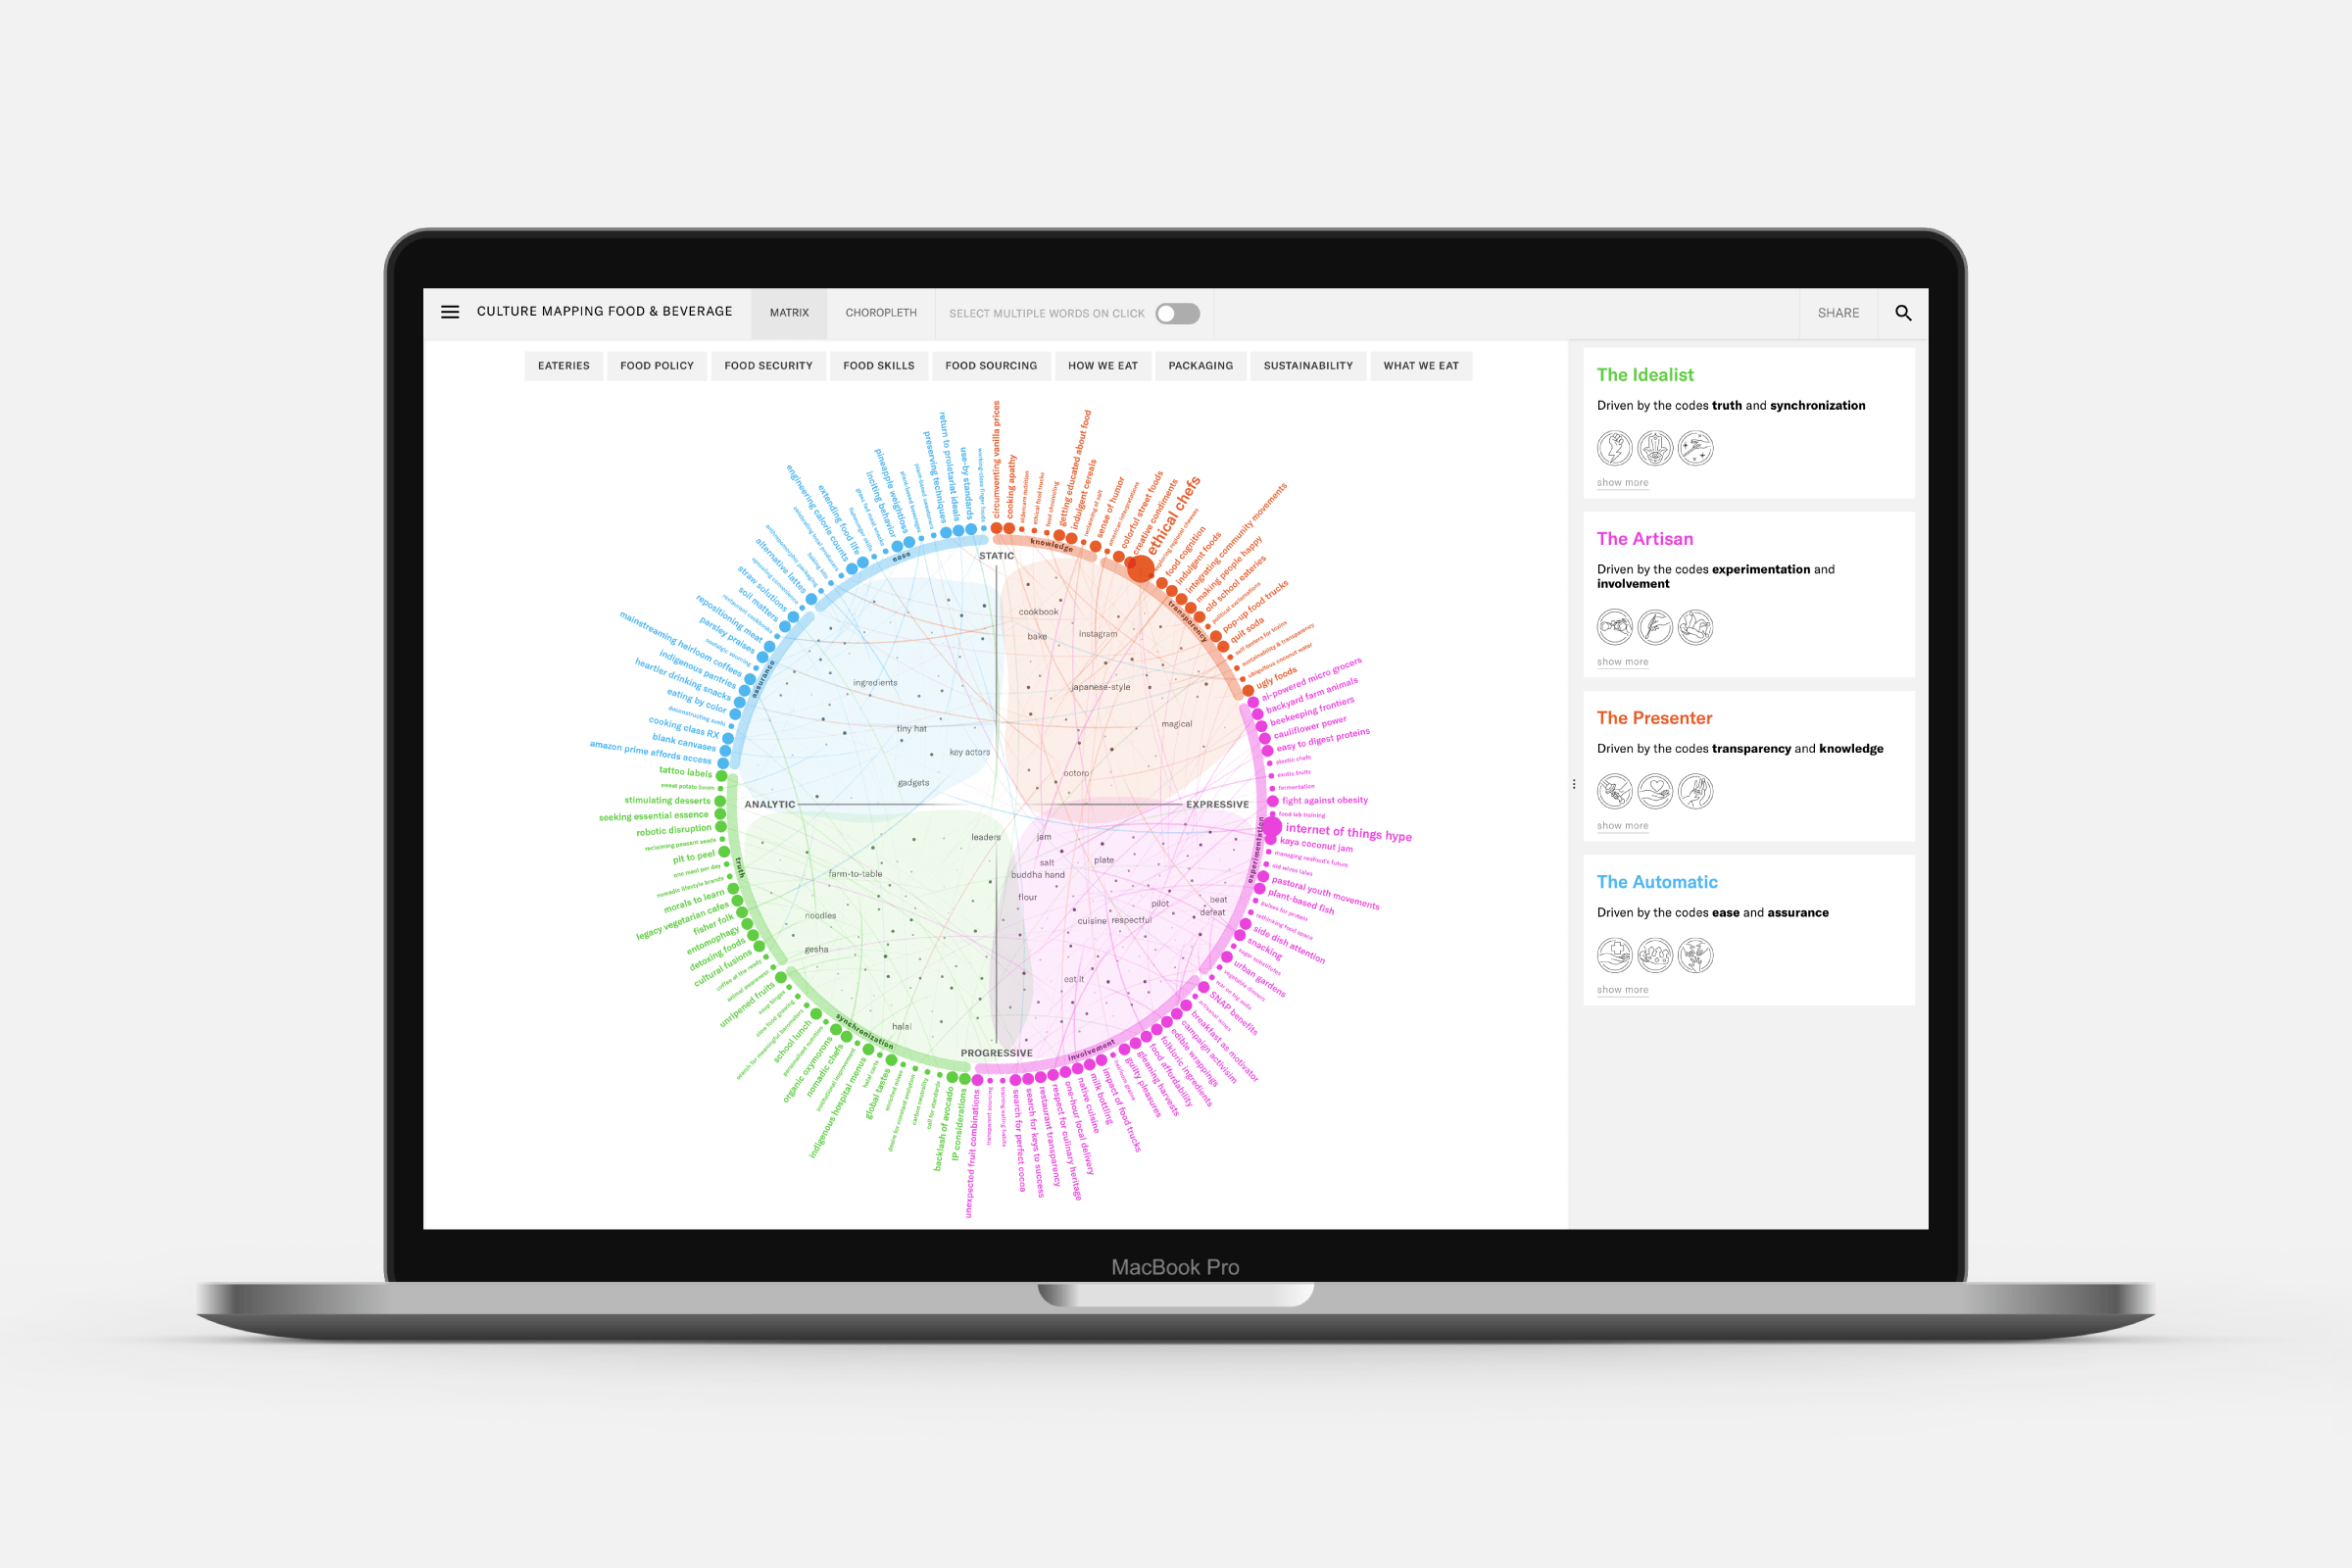 The interactive visual that lets you explore scenarioDNA's Culture Mapping